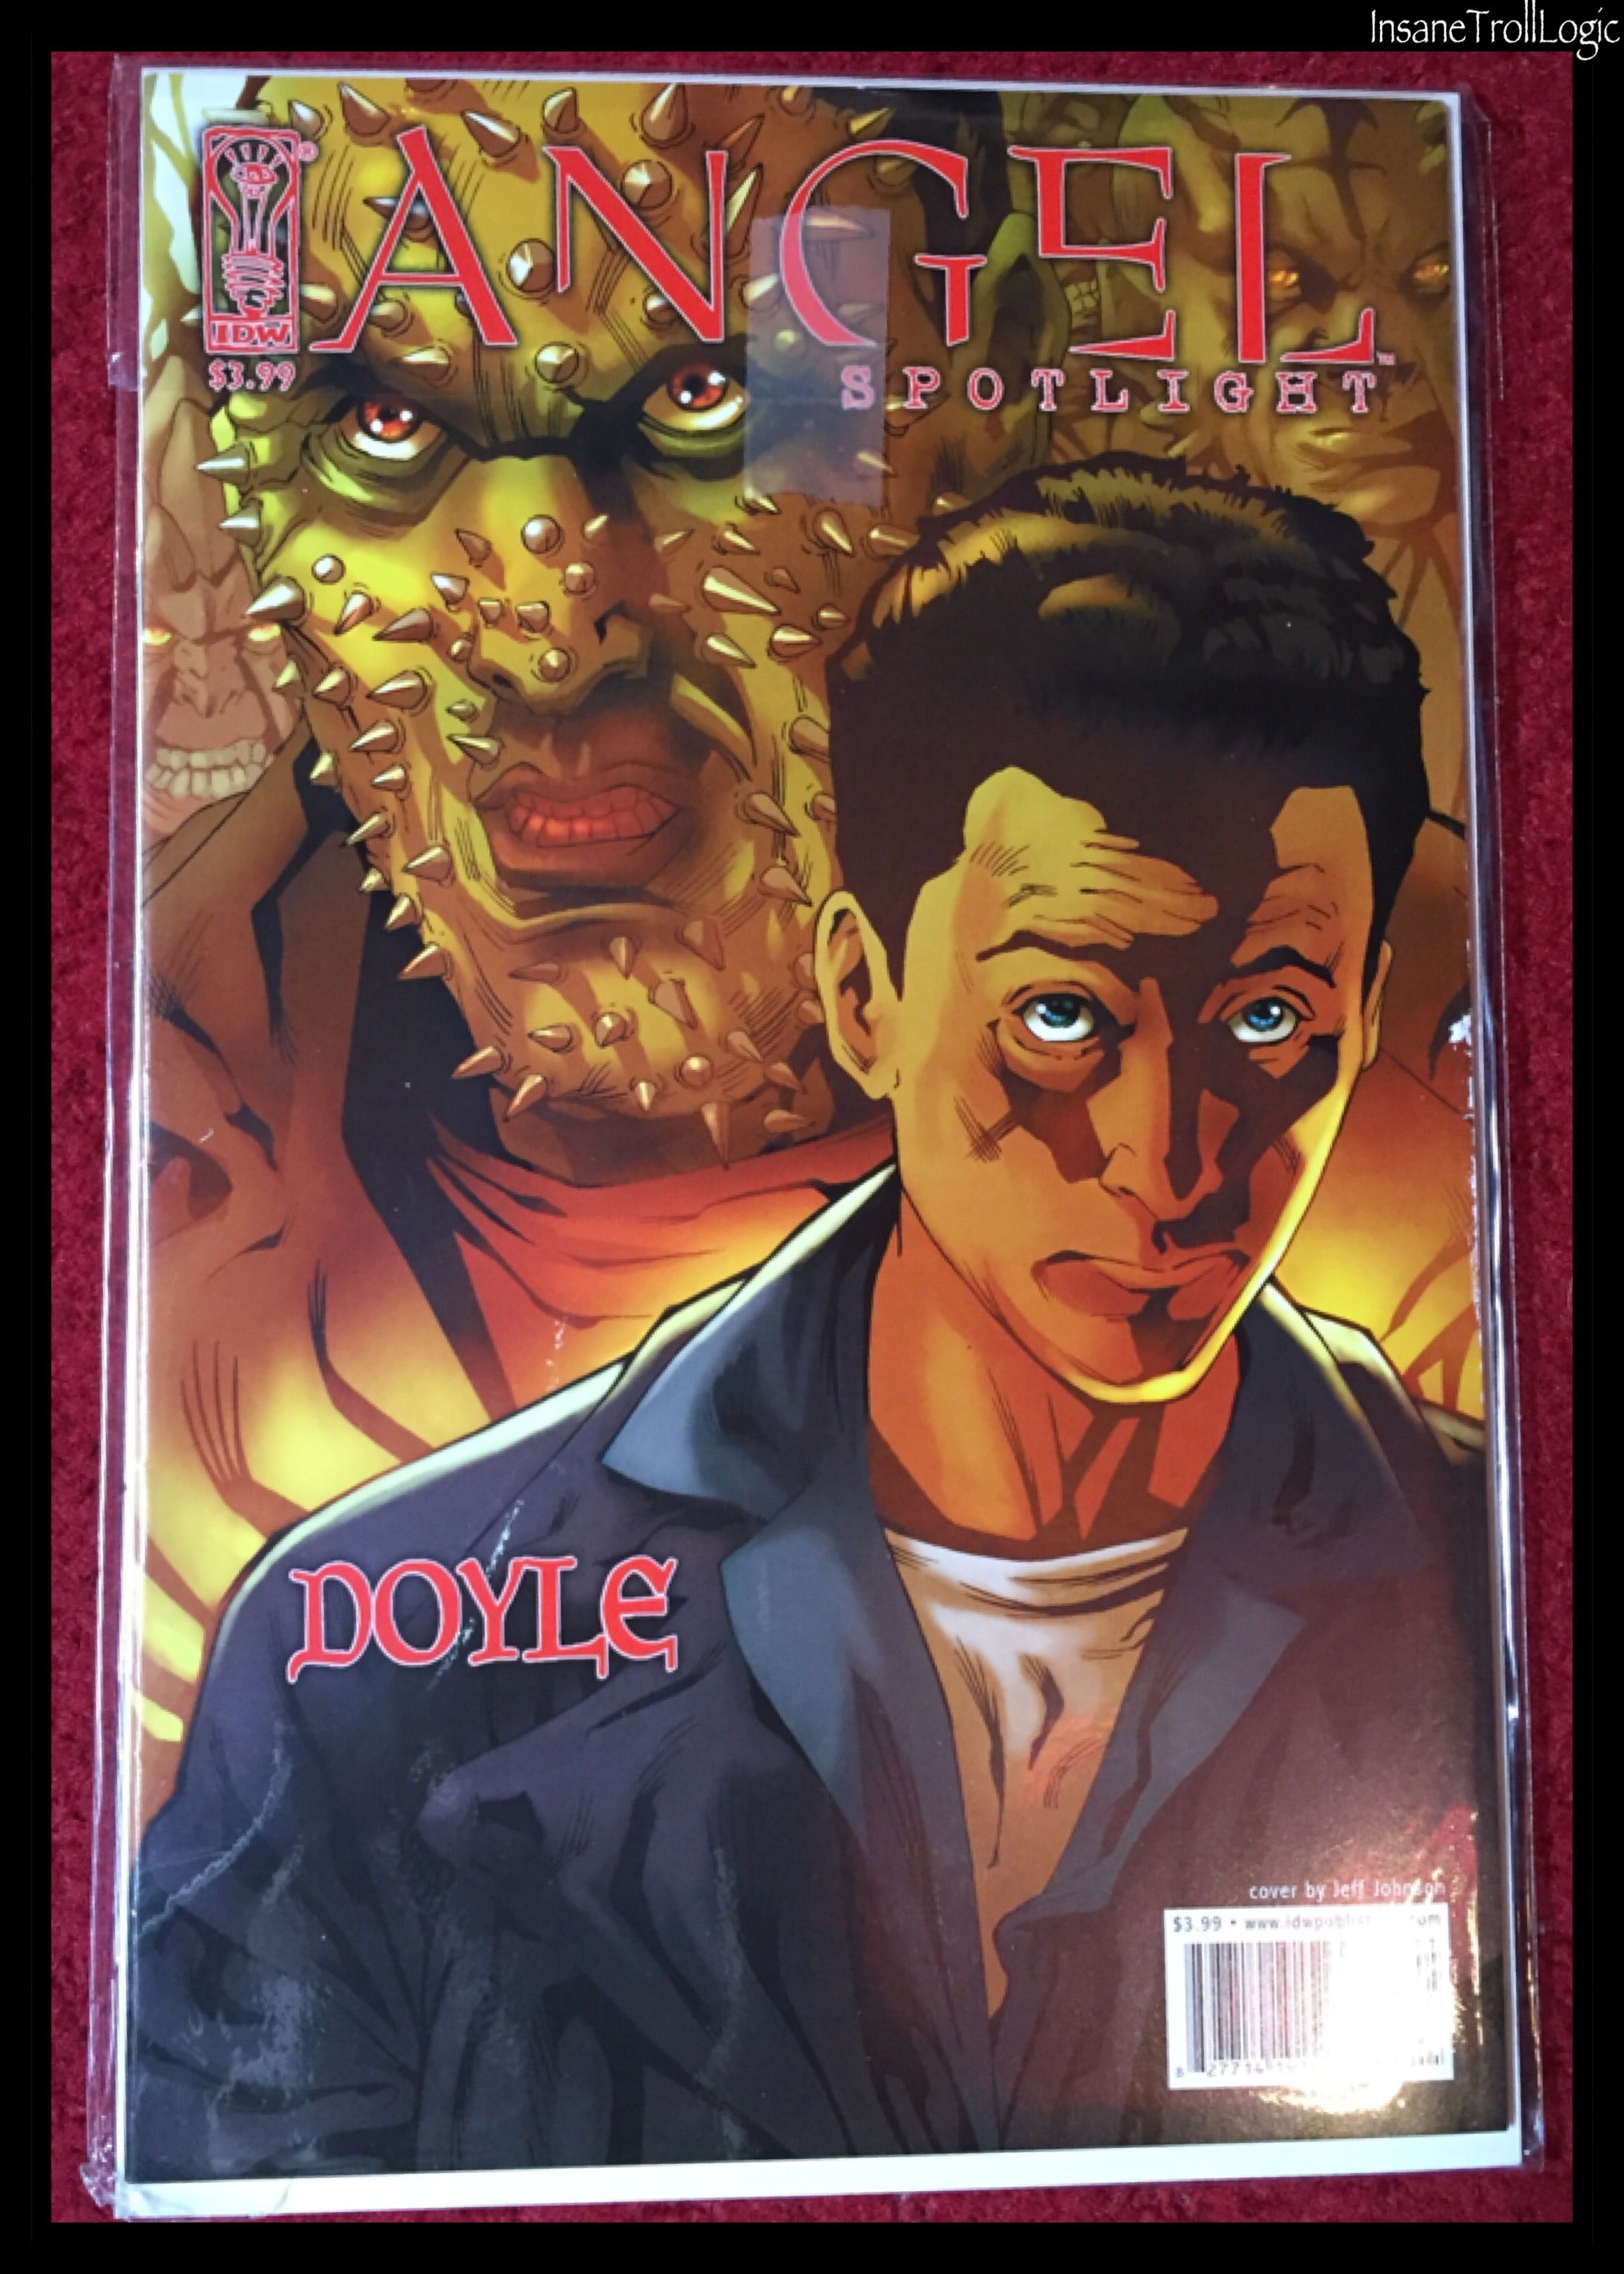 Pin By Kevin Deran On Comics Buffy Tvsangel Collection Vampire